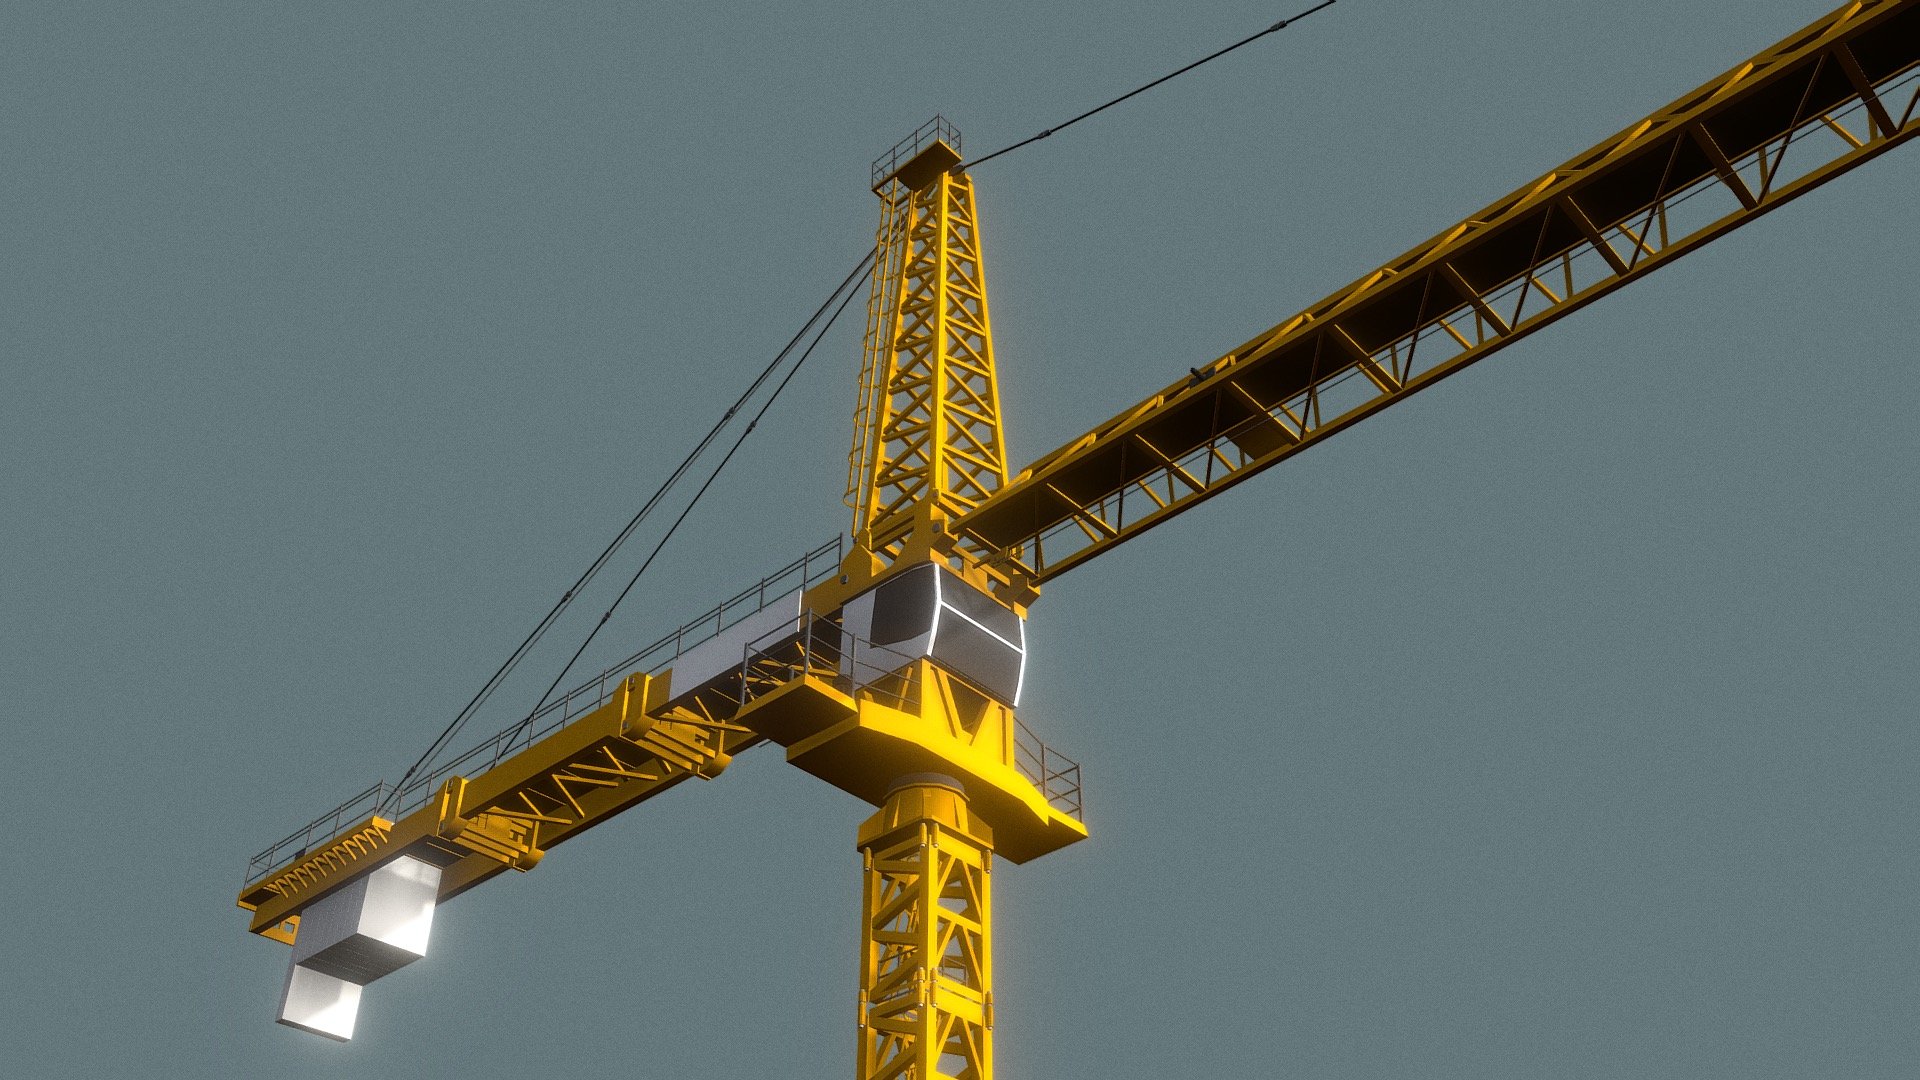 Check our other assets on

Asset Store and www.megapoly.art - Tower Crane - 3D model by Megapoly.Art 3d model